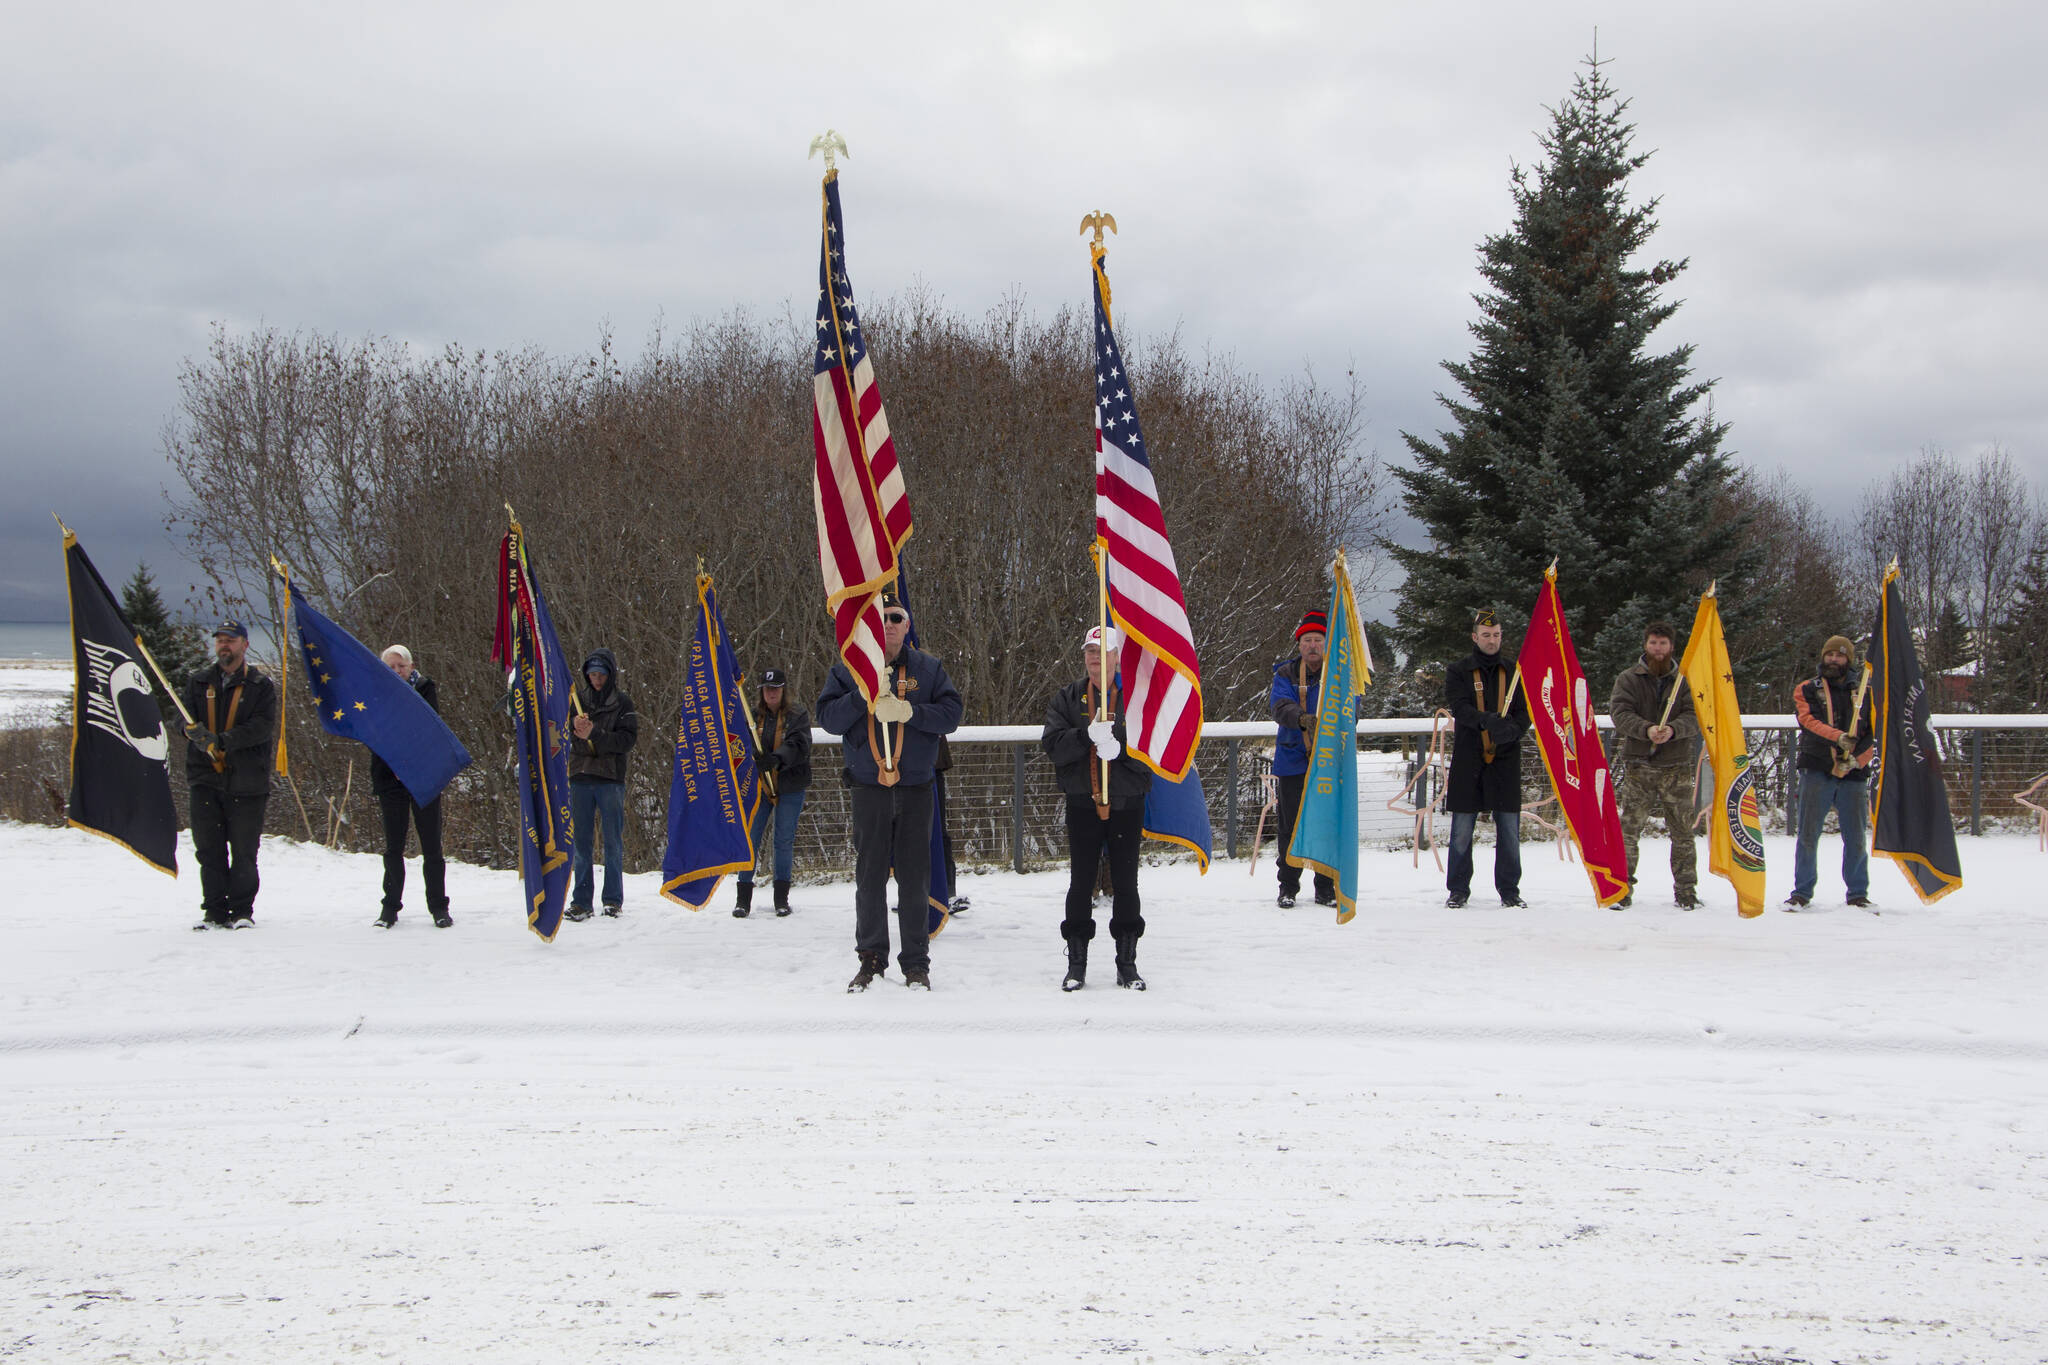 The color guard lowers the flags in honor of the veterans who have passed as Christie Hill plays “Taps” during the Veterans Day ceremony at the Alaska Islands and Ocean Visitor Center. (Photo by Sarah Knapp/Homer News)